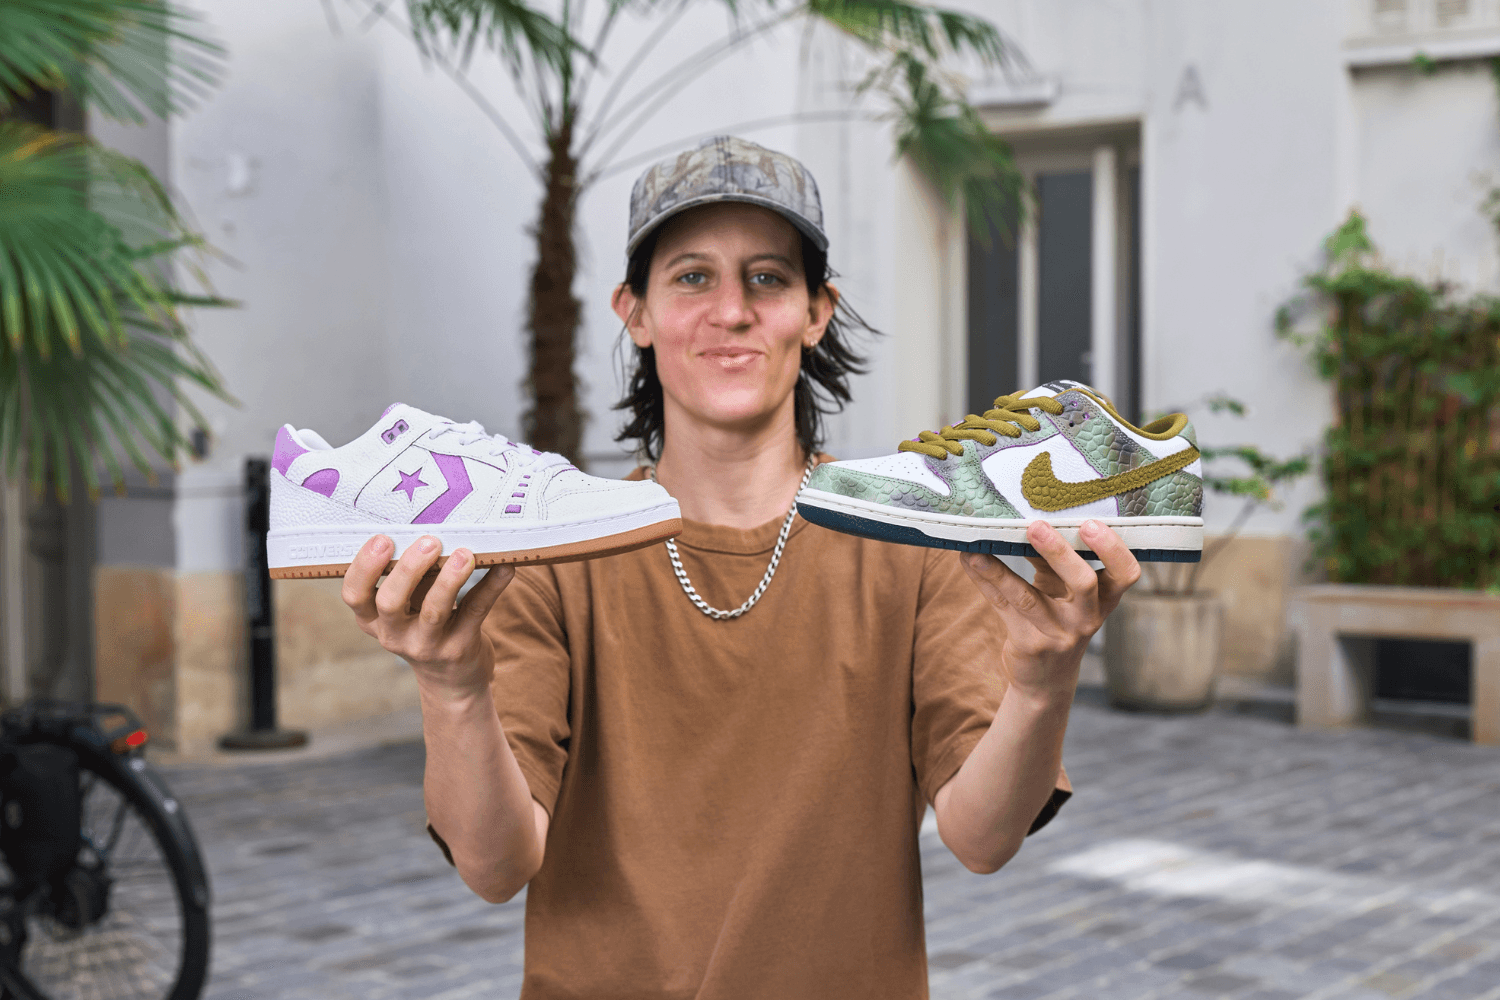 Nike SB and Converse unveil 2024 USA Skateboarding Kit with Alexis Sablone